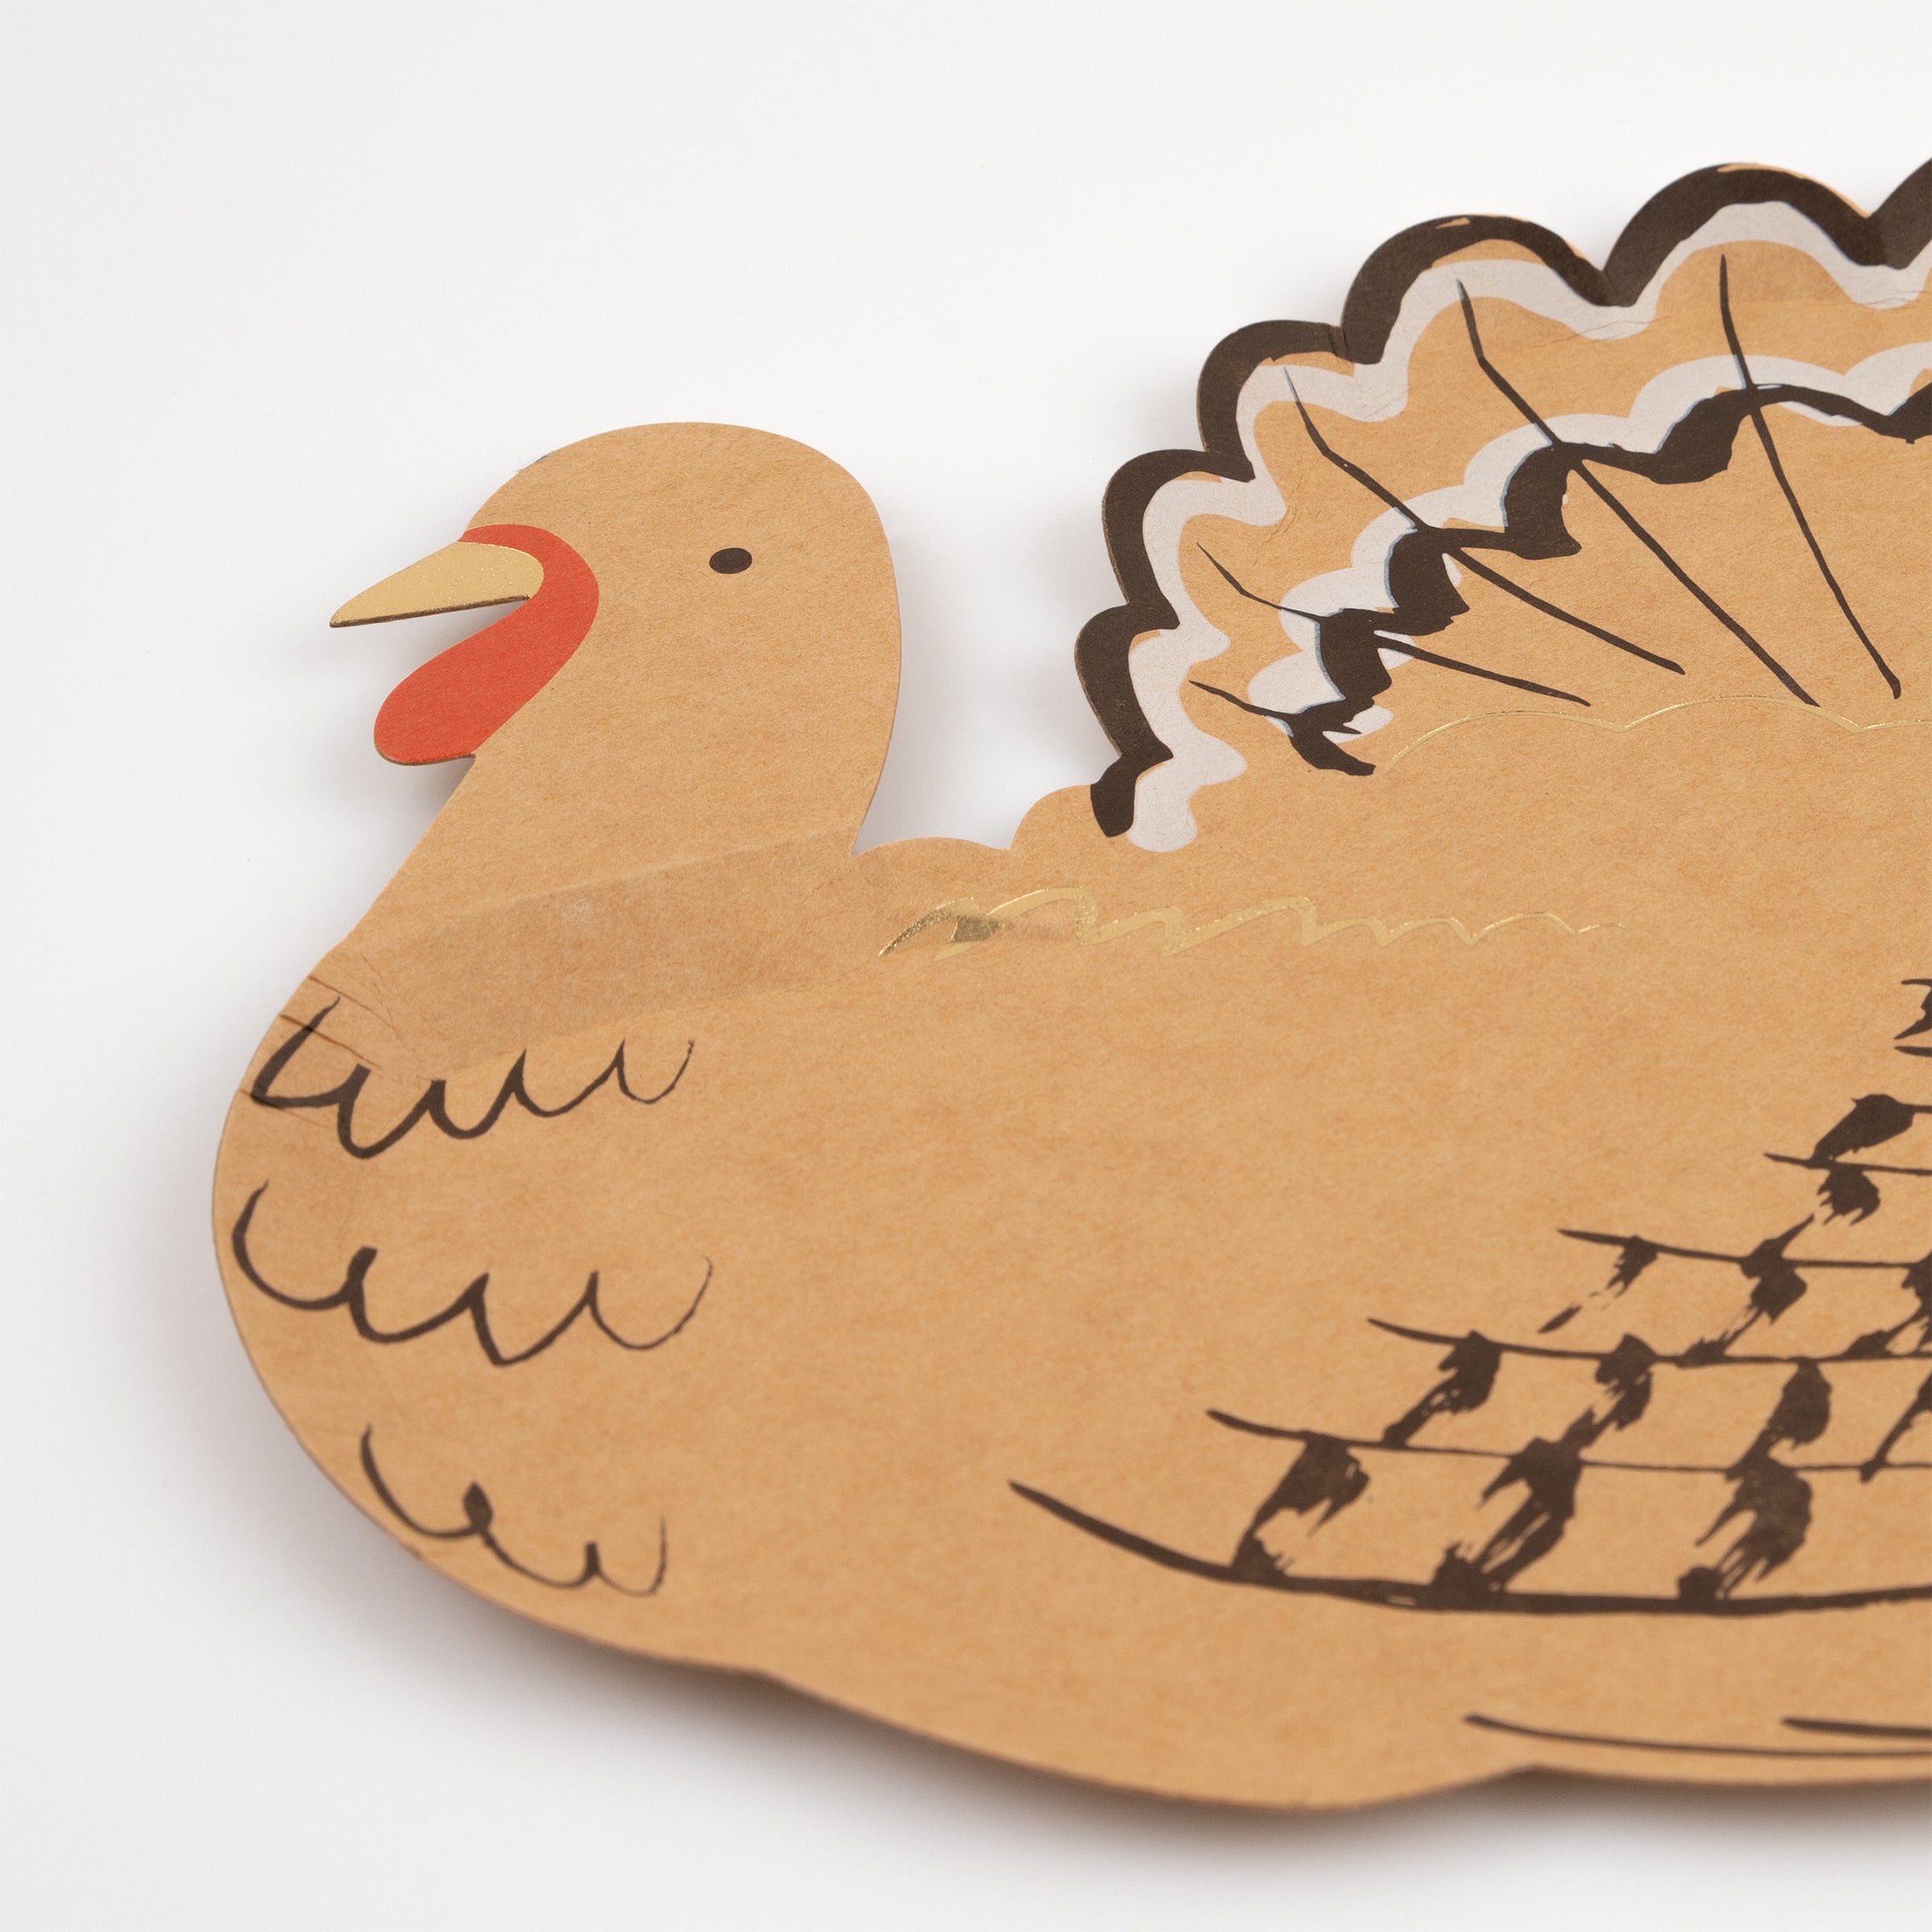 Our fun party plates, in the shape of a turkey, make wonderful Thanksgiving decorations.